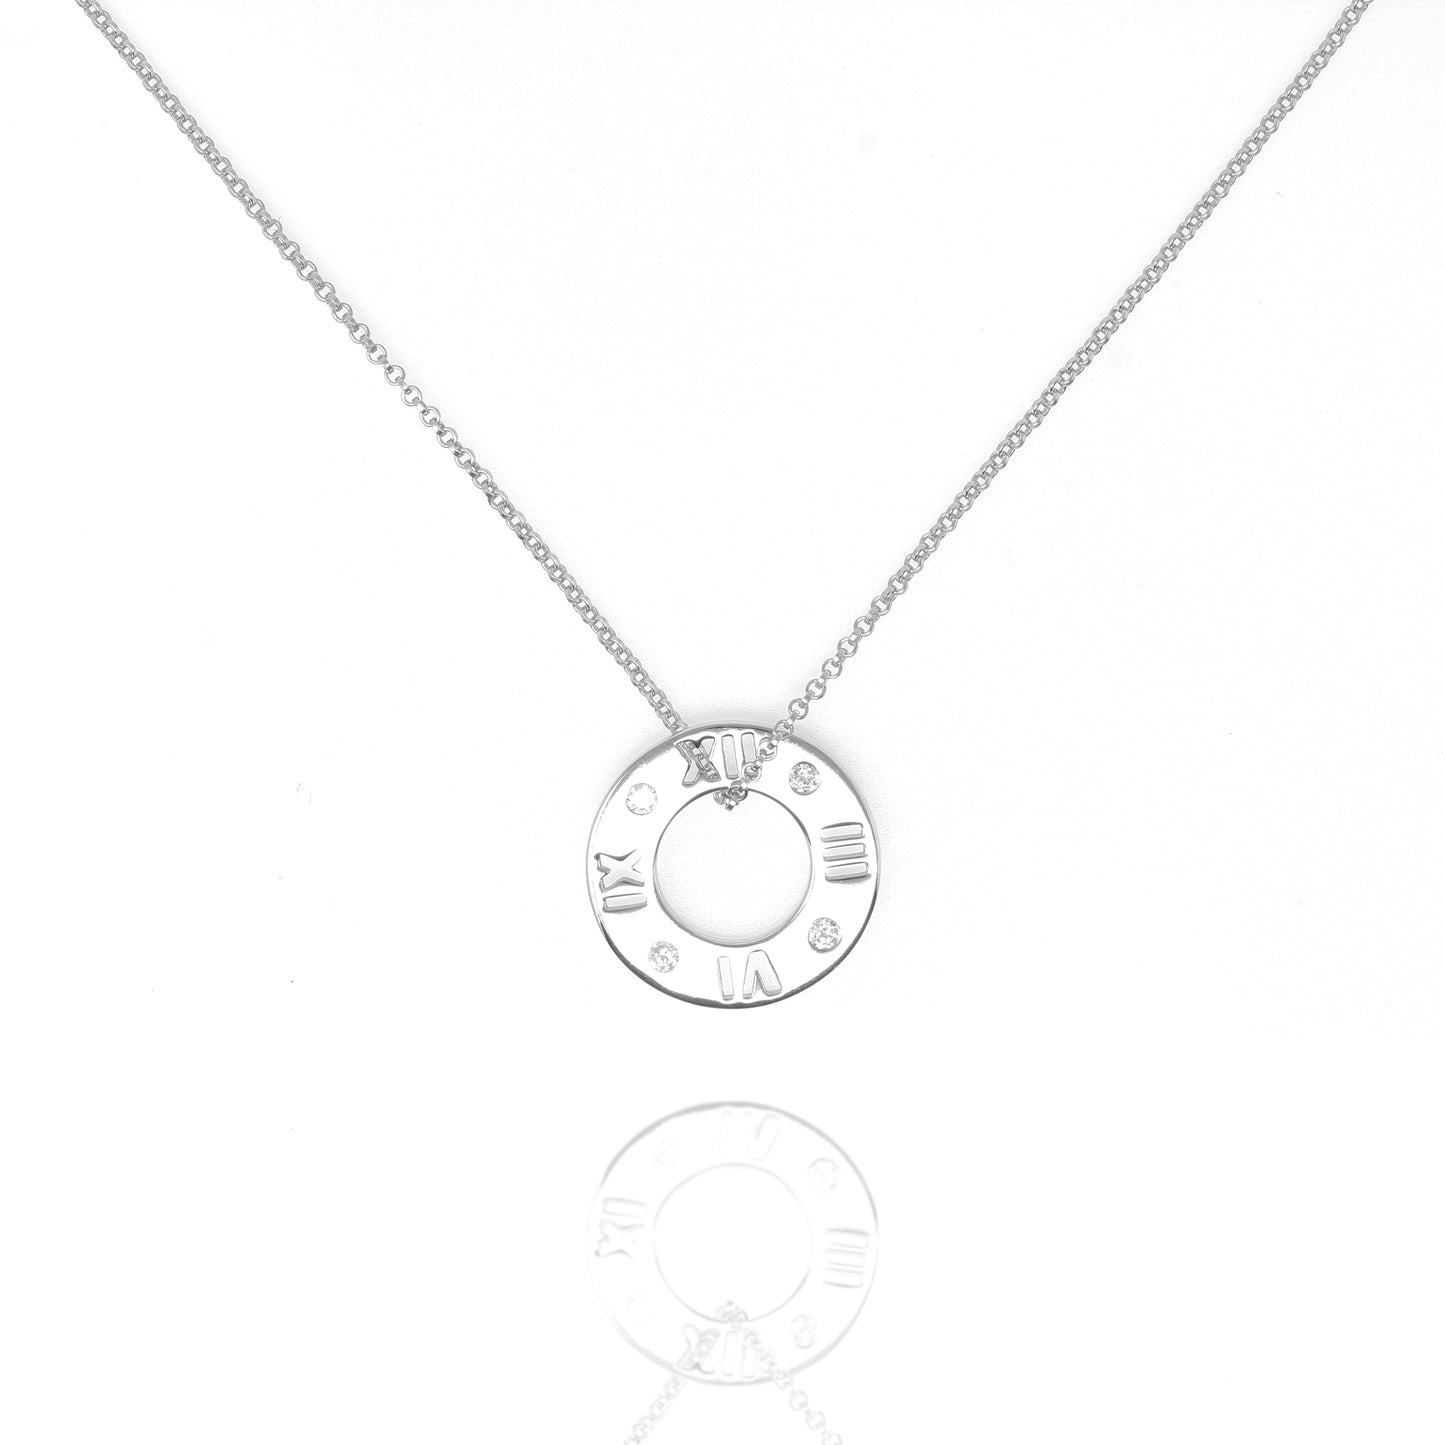 NG-21/S - Chain and Pendant with Hollow Disk and Cubic Zirconia